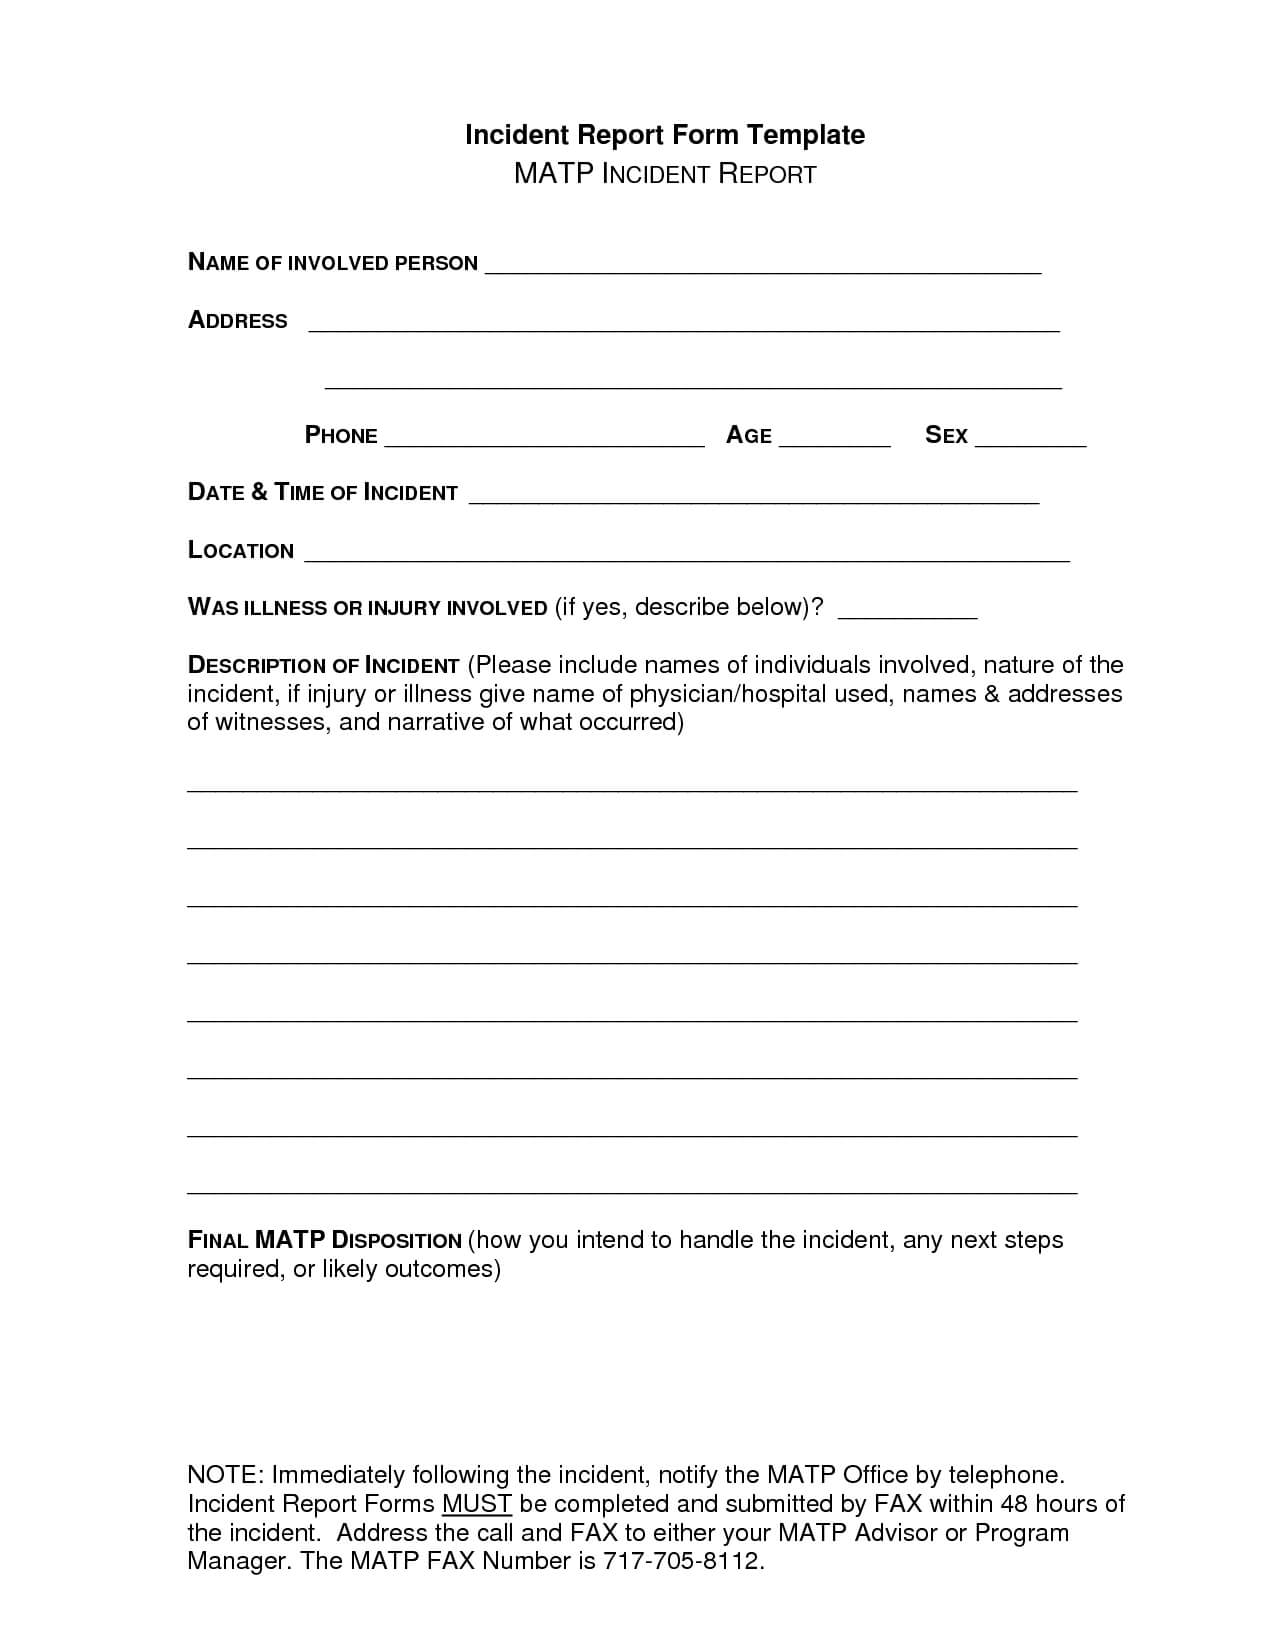 026 Template Ideas Incident Report Form 3391 Free Unusual With School Incident Report Template